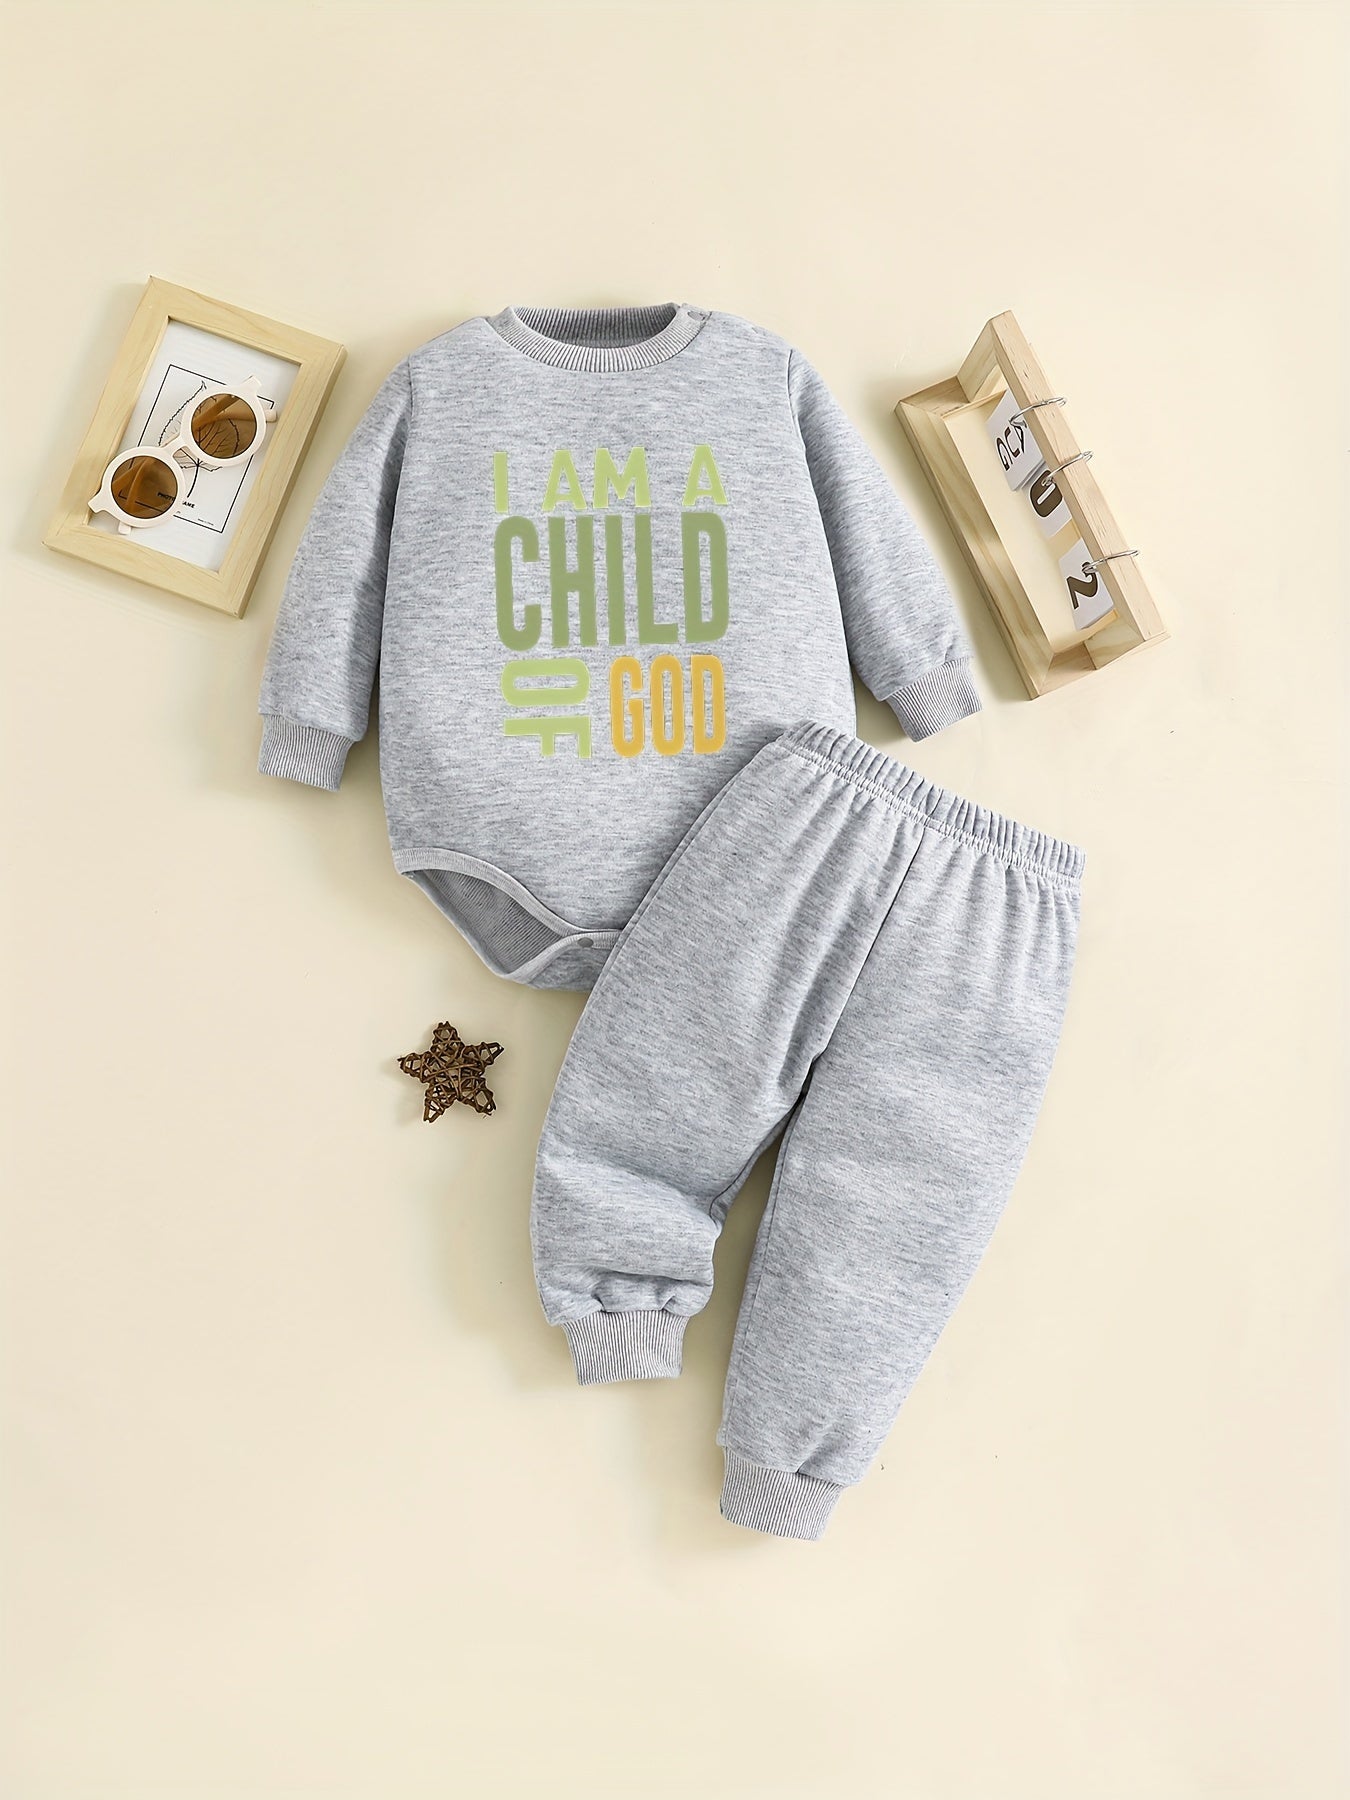 I AM A CHILD OF GOD Toddler Christian Casual Outfit claimedbygoddesigns